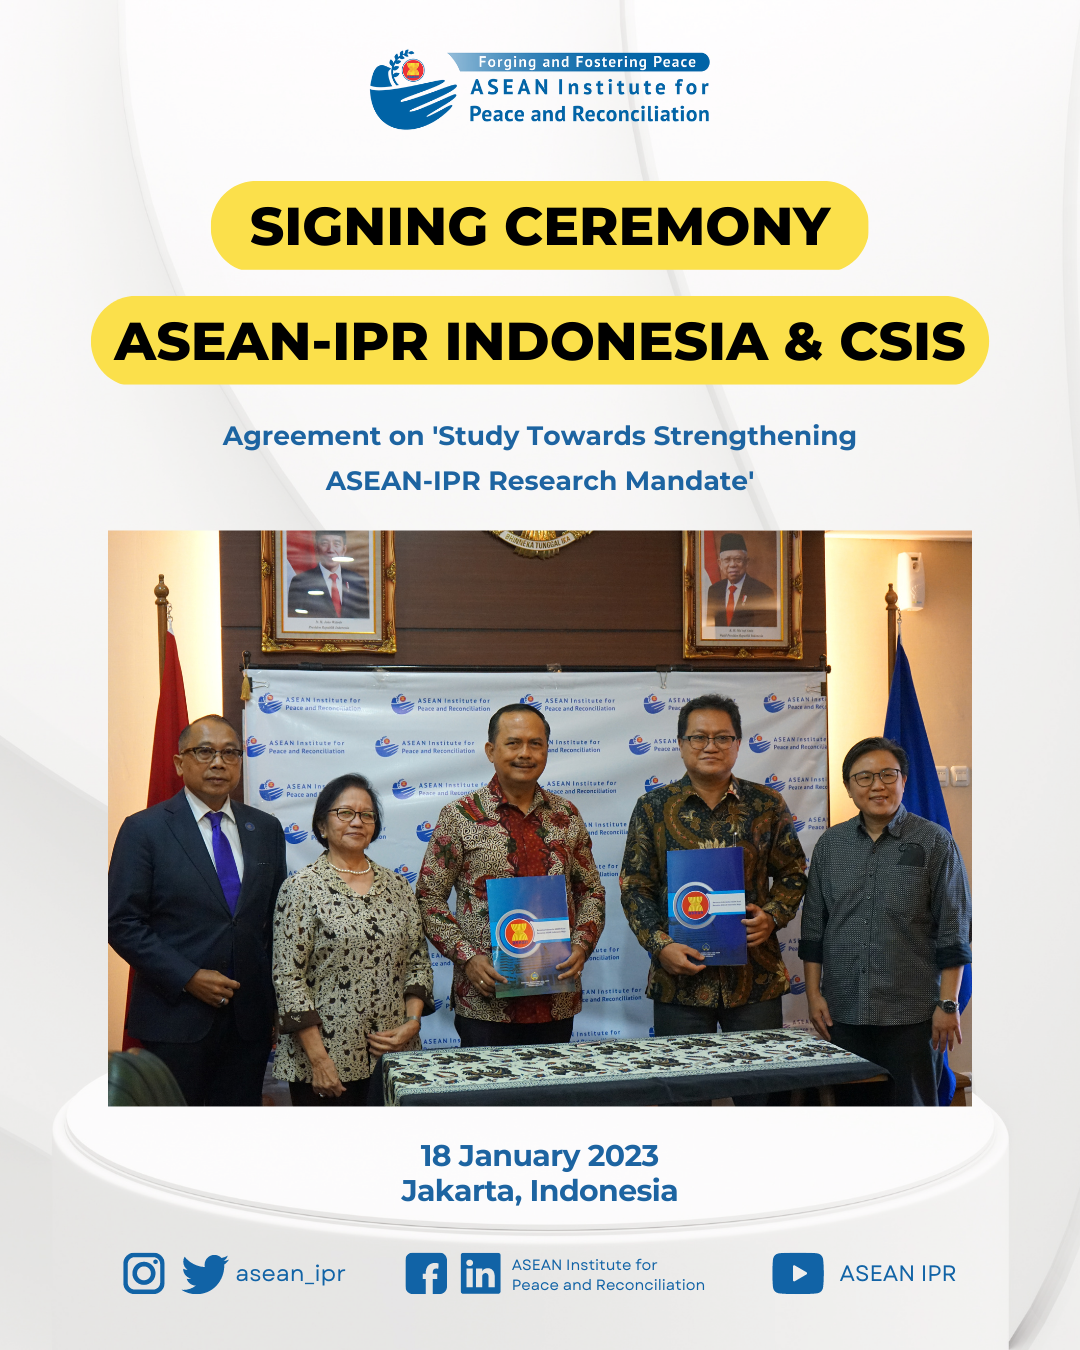 Signing Ceremony Between ASEAN-IPR Indonesia and CSIS Indonesia for Study Towards Strengthening the ASEAN-IPR Research Mandate